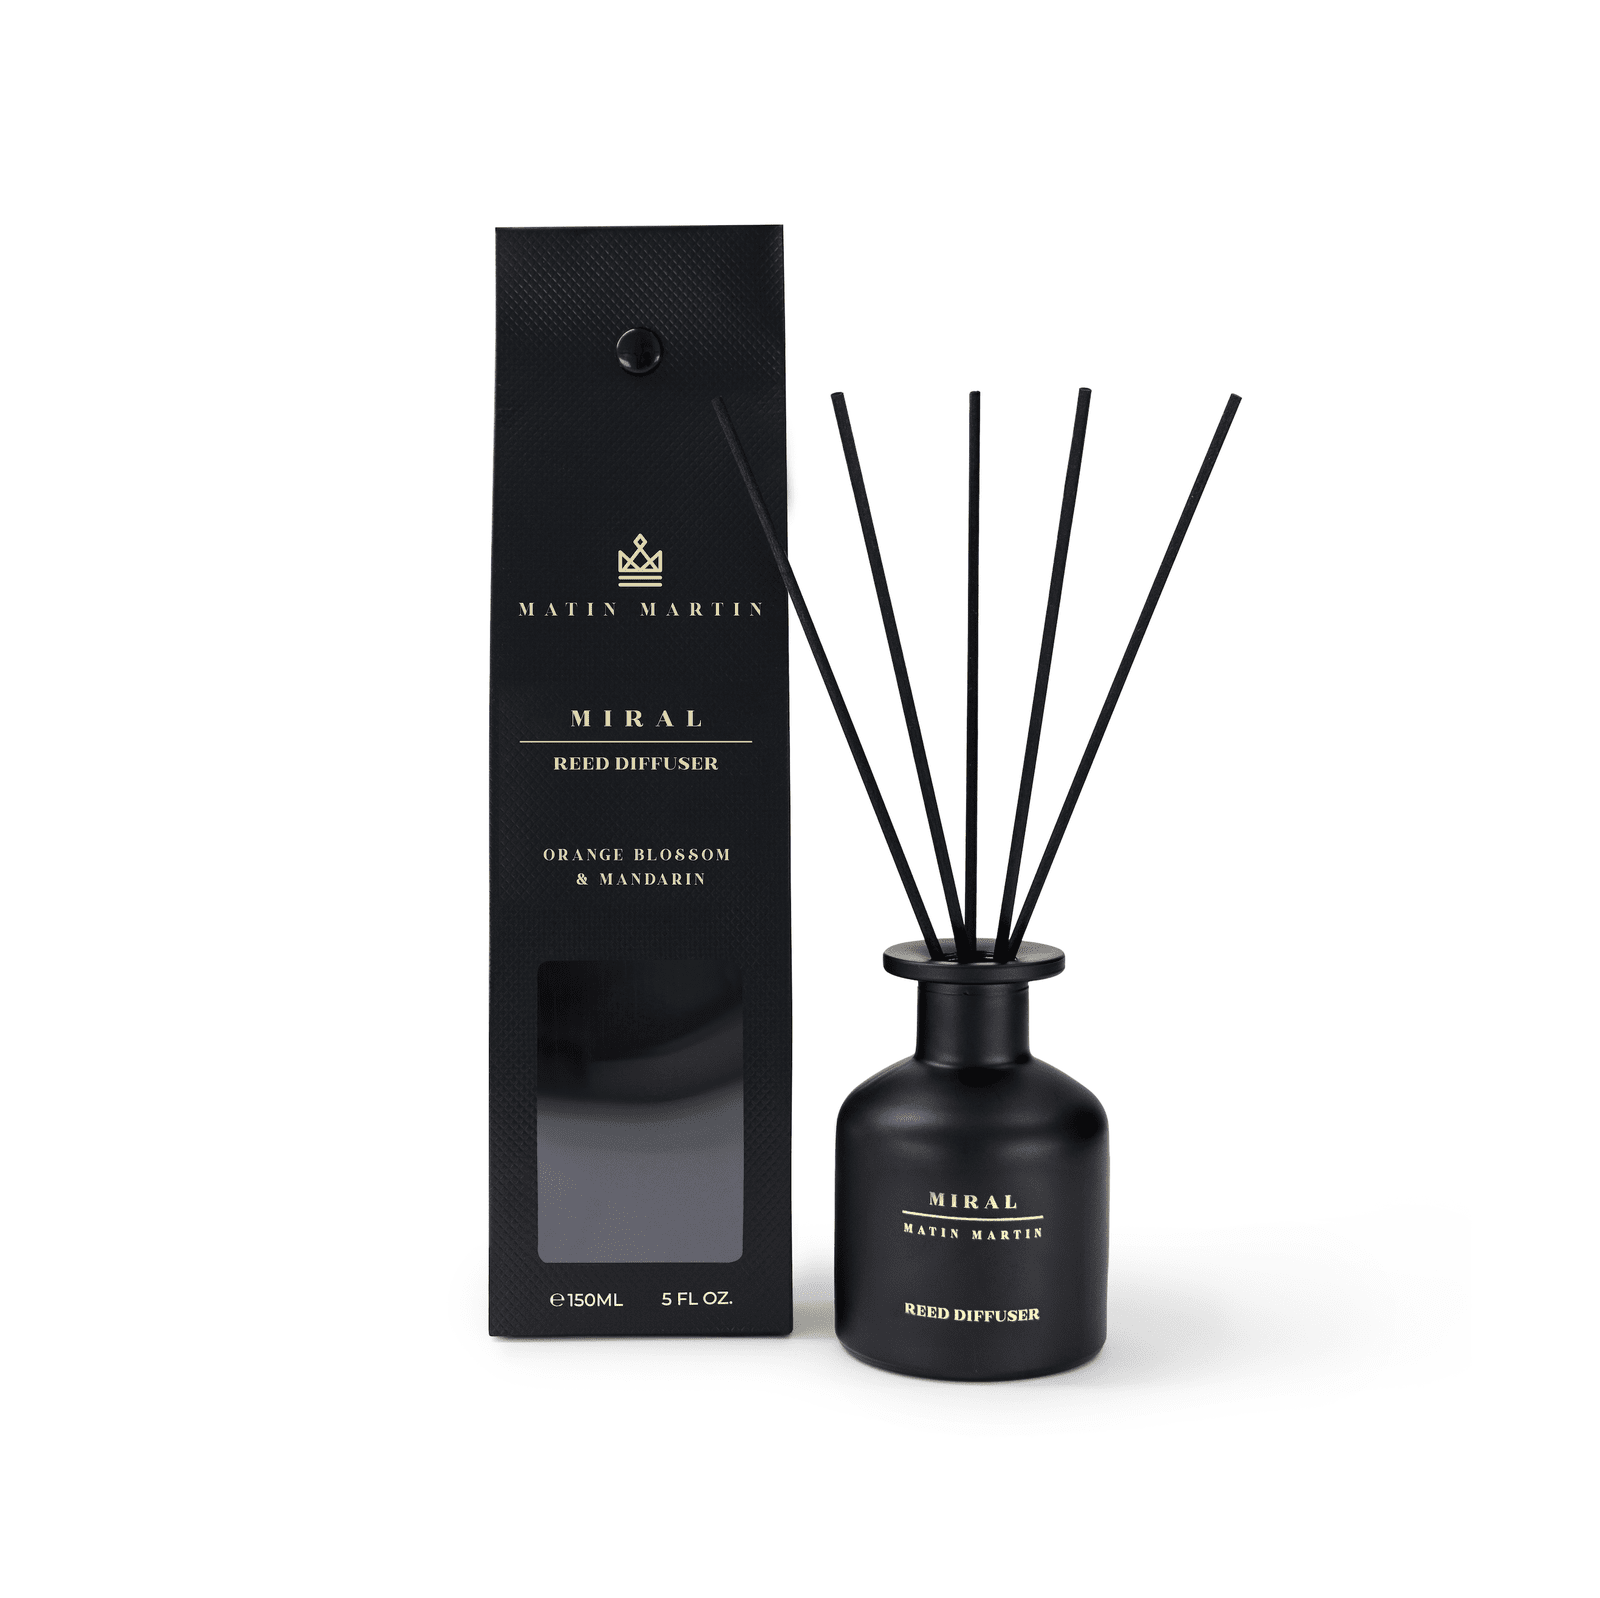 MIRAL - Reed Diffuser 150ml By Matin Martin